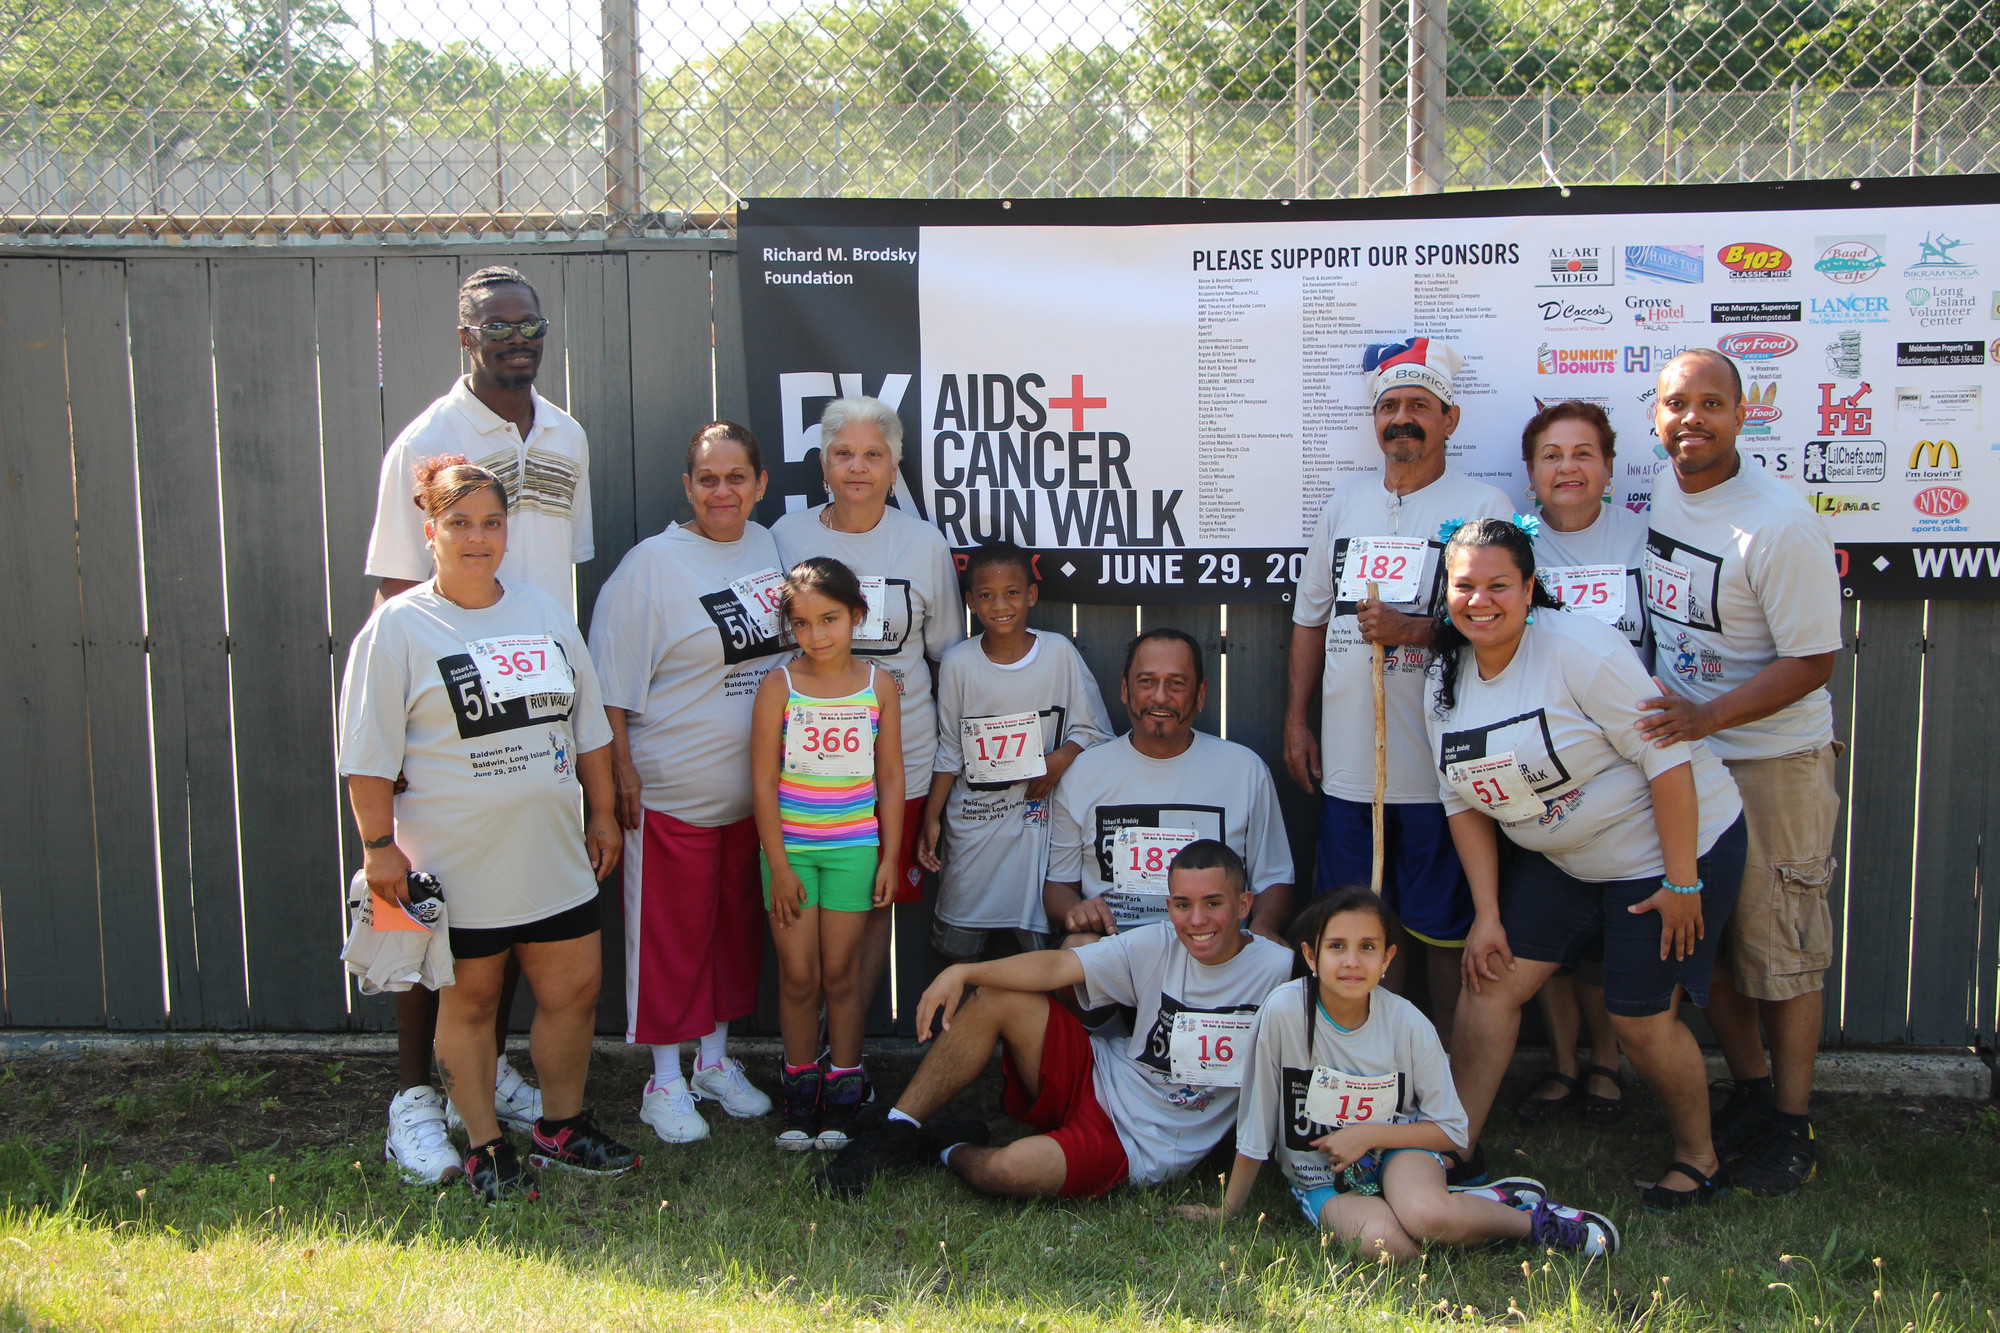 People of all ages ran and walked in the seventh annual 5K Aids/Cancer Run/Walk at Baldwin Park on June 29. The event raised thousands of dollars for toys to be purchased and donated to area hosptials and organizations that help people in need.